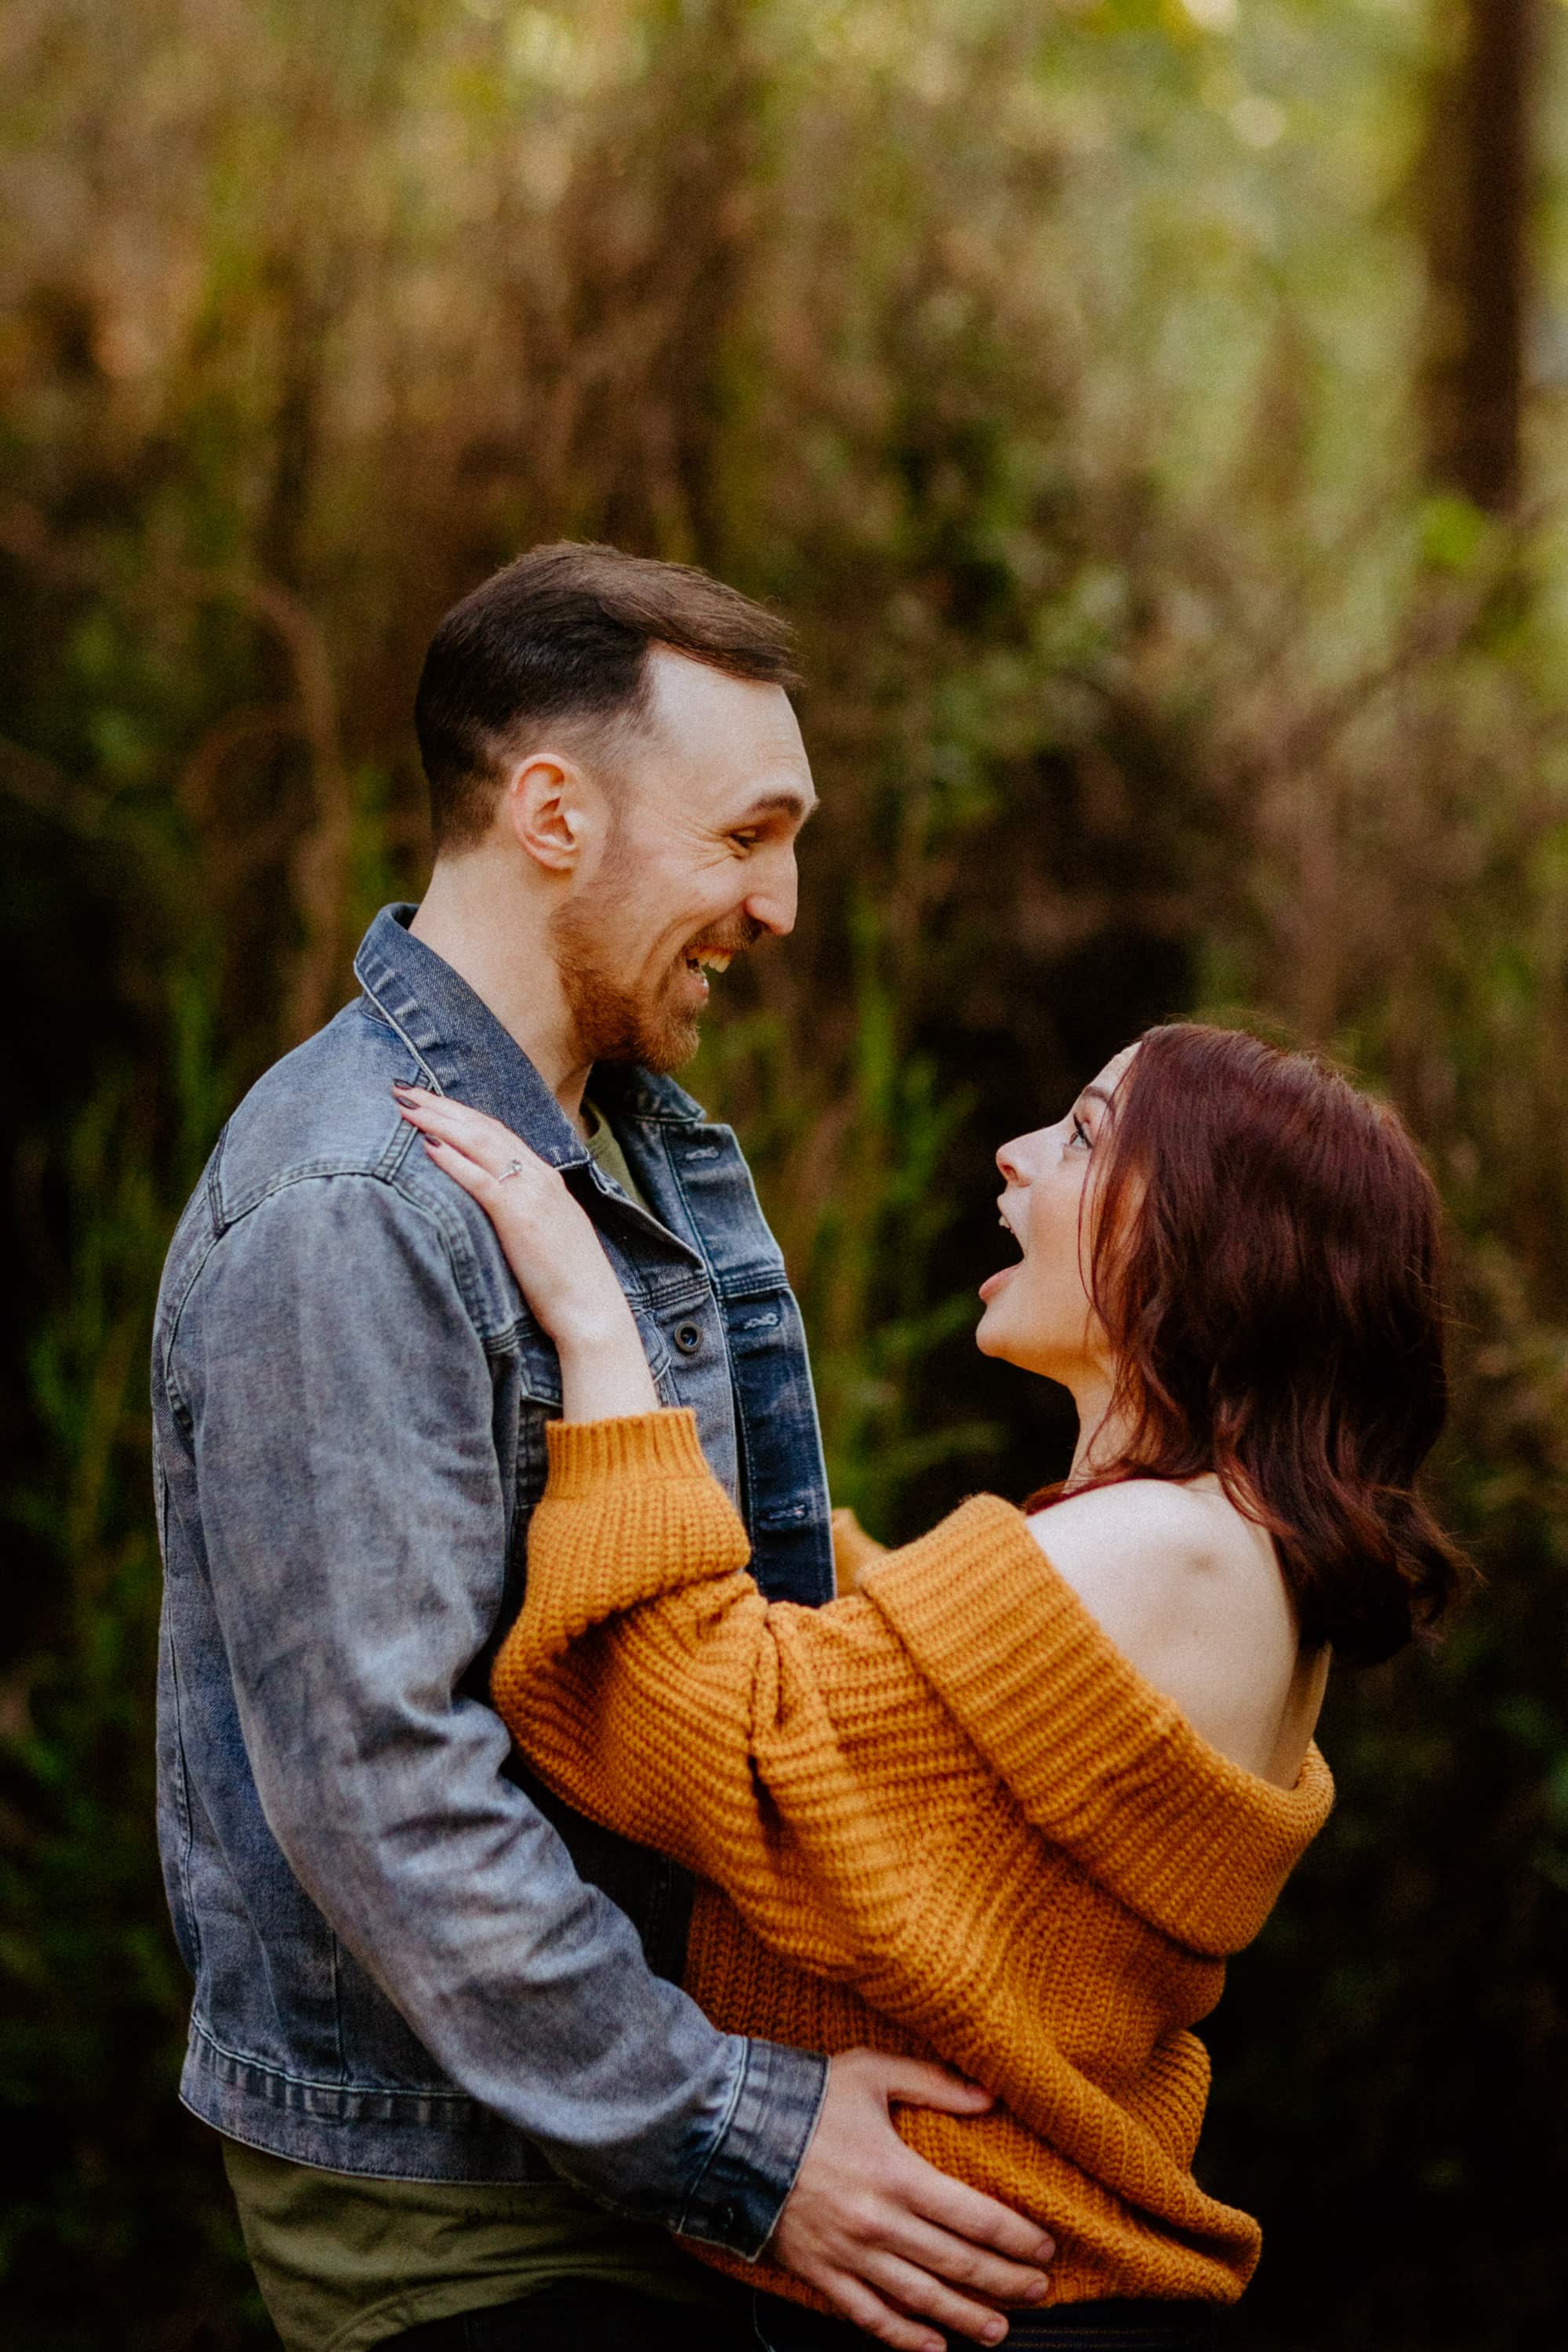 The couple's playful and romantic moment captured amidst the stunning redwood forest.